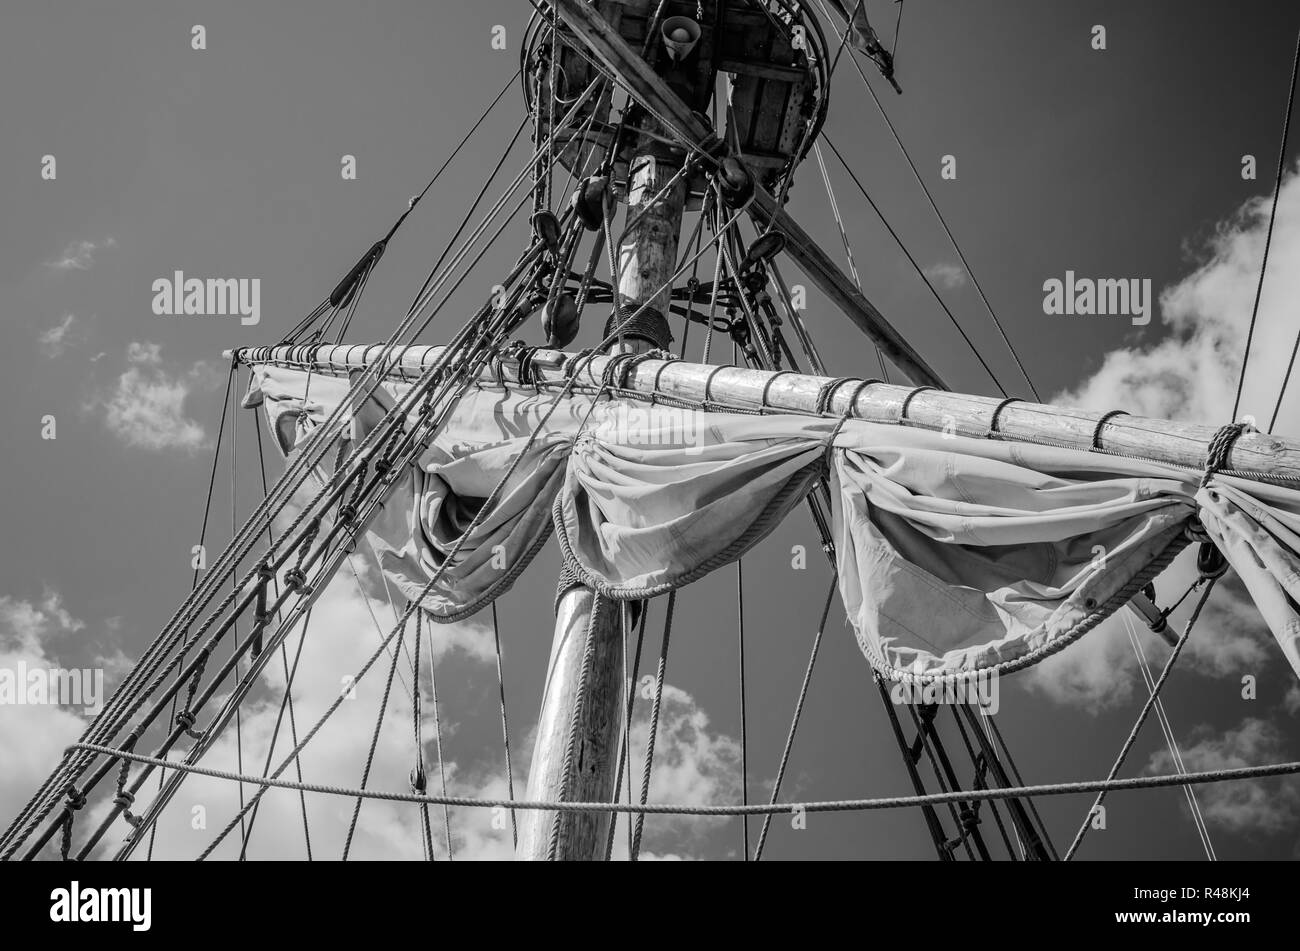 Mast with sails of an old sailing vessel, black and white photo Stock Photo